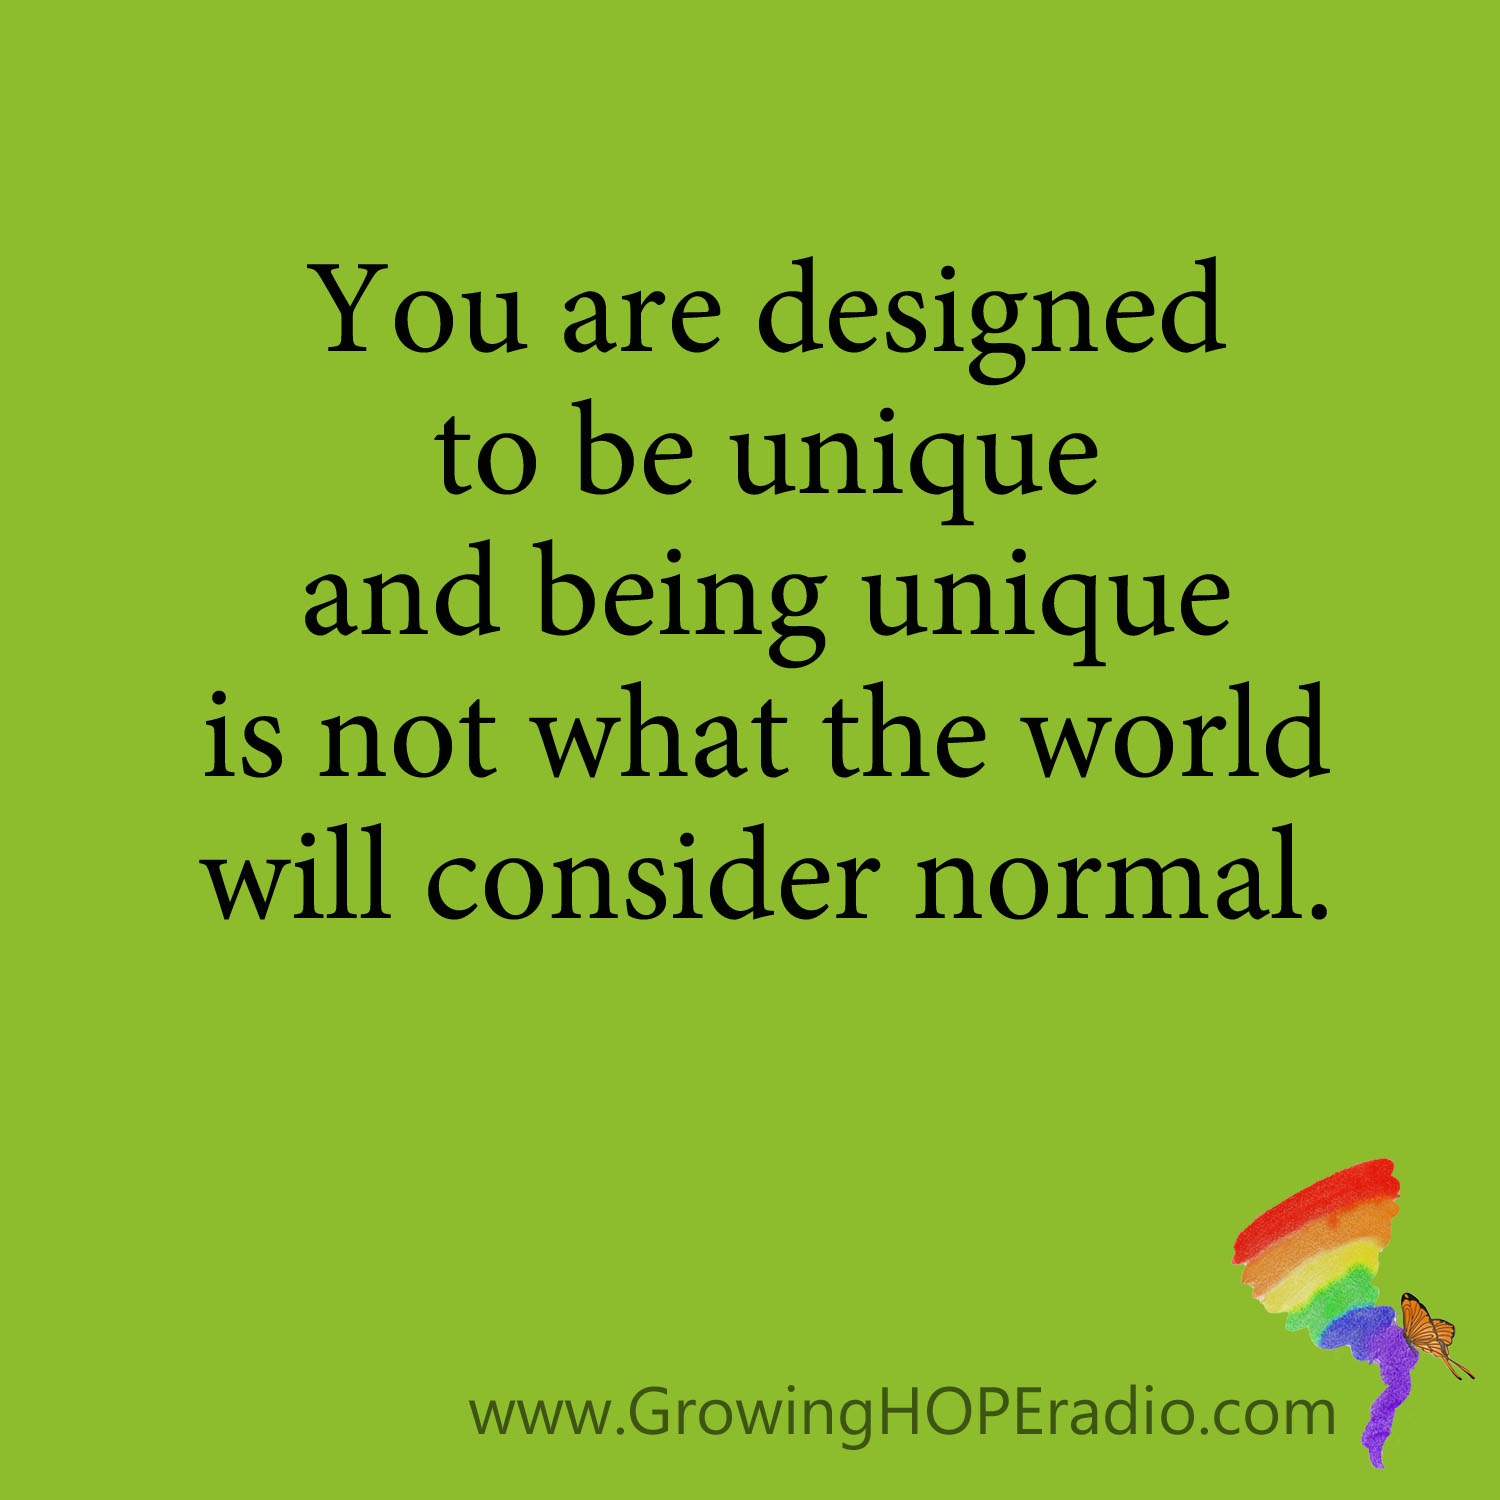 #GrowingHOPE Daily - quote - not normal